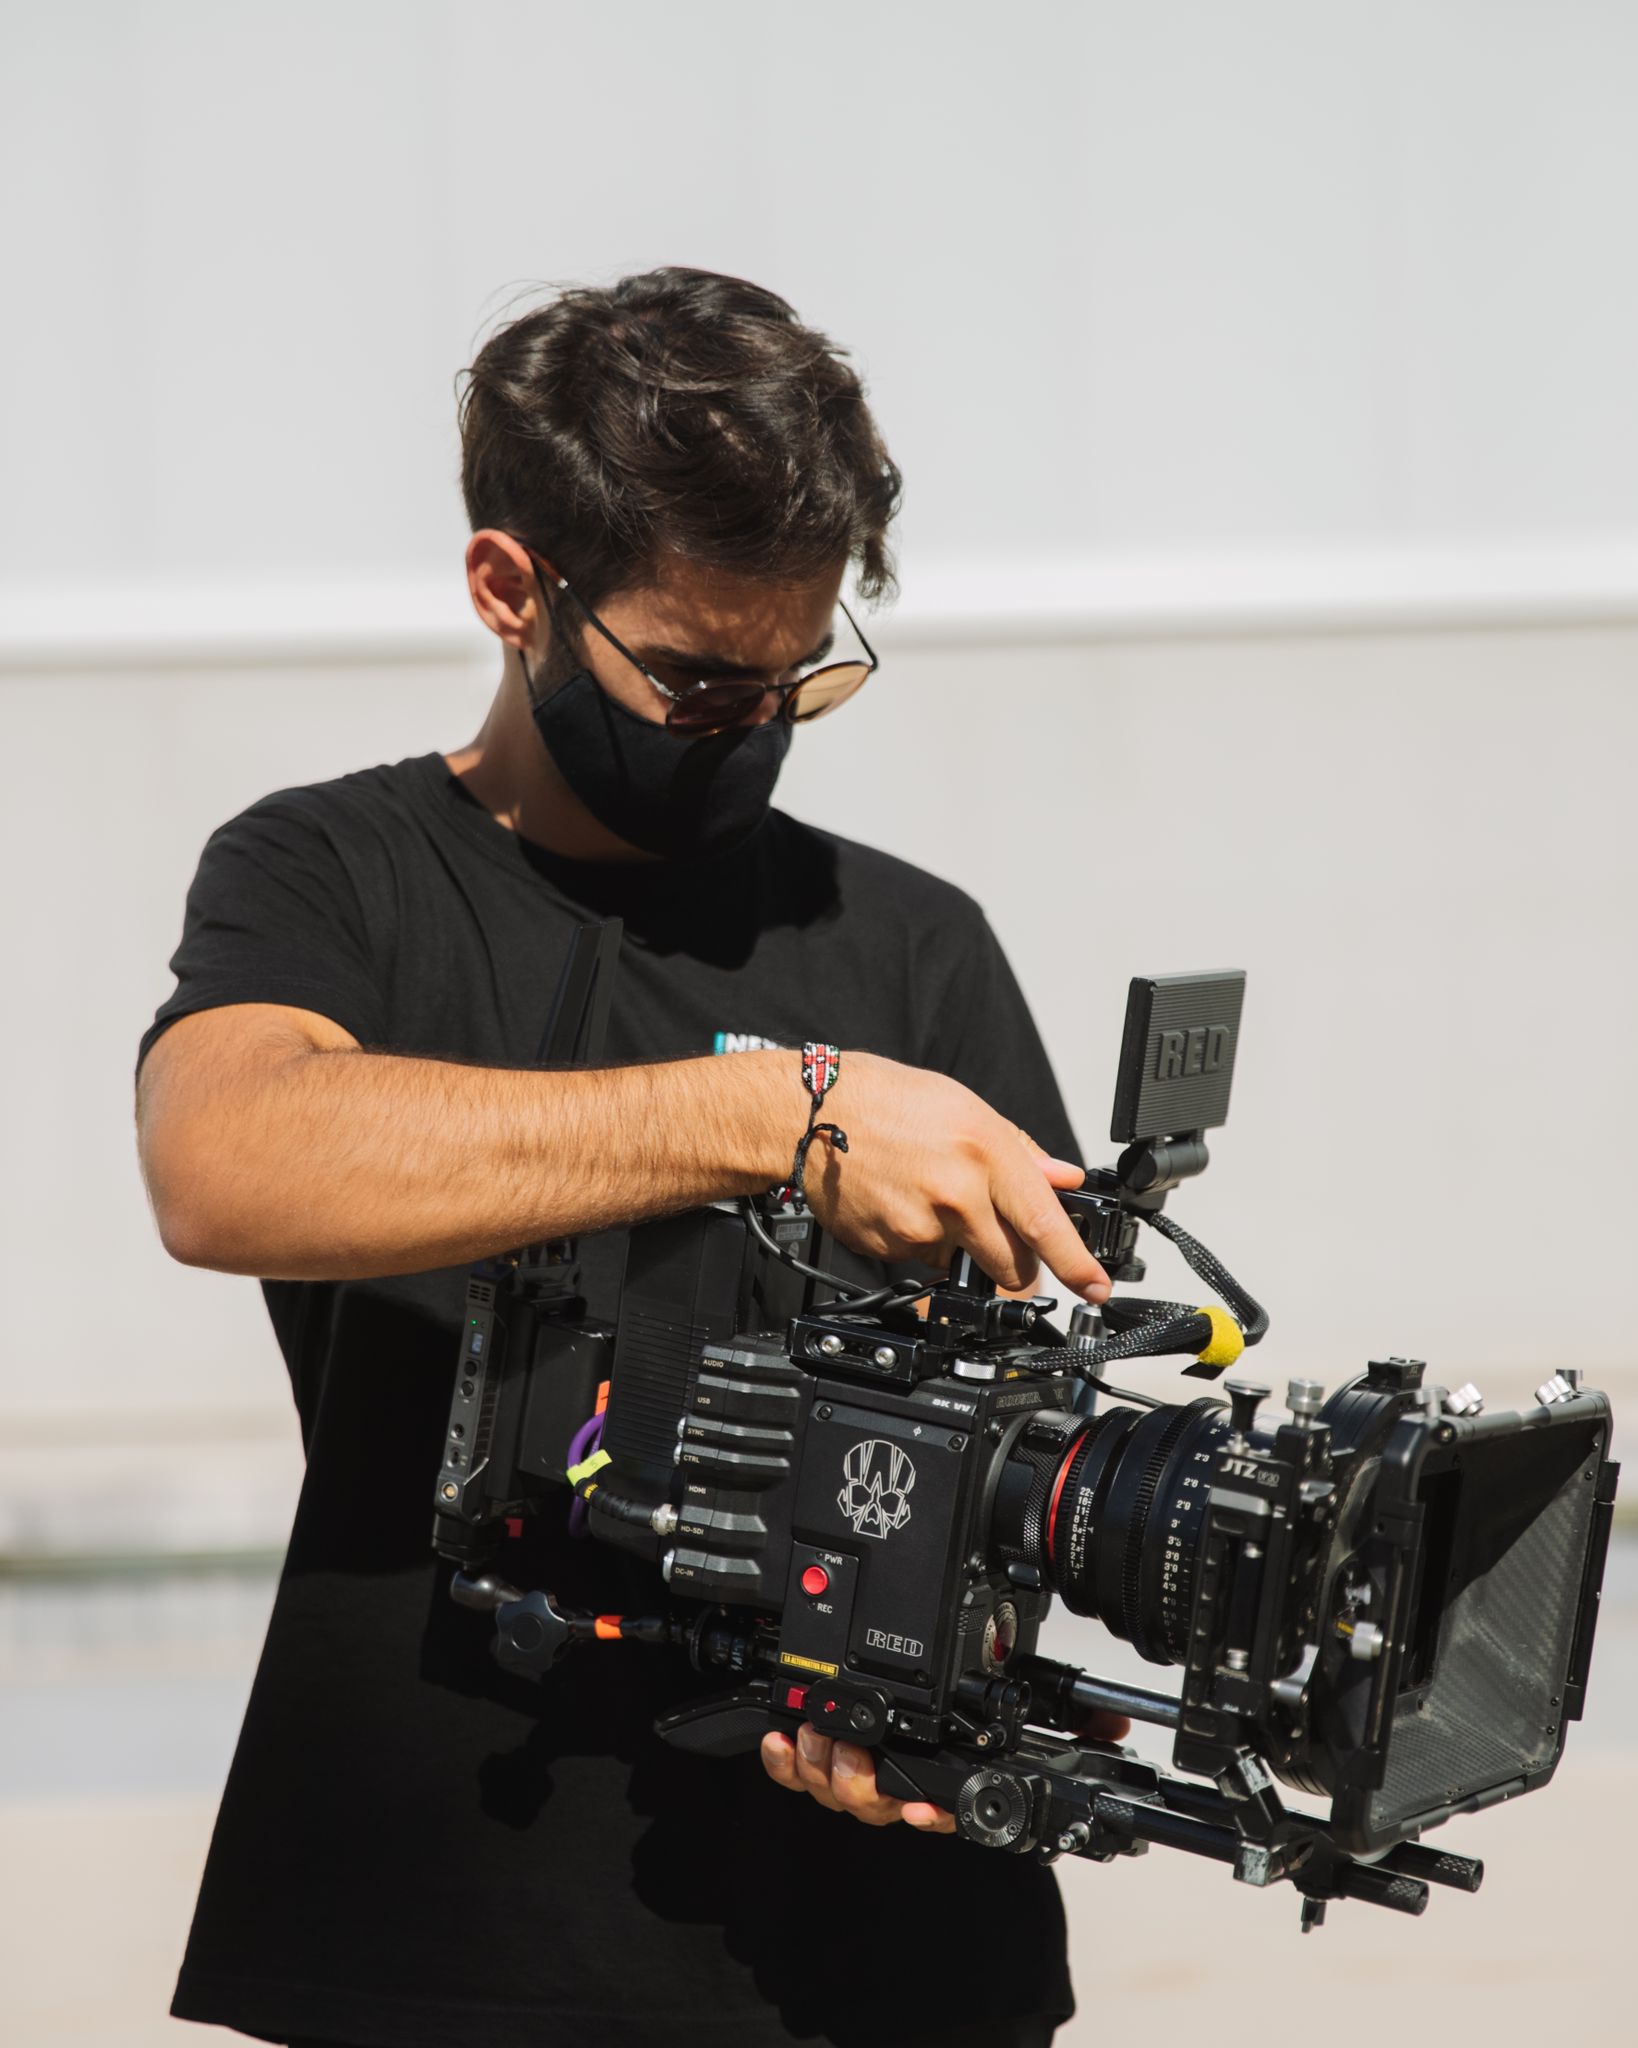 Picture of Sergi Penalba while holding a camera who is running NextGen Creative